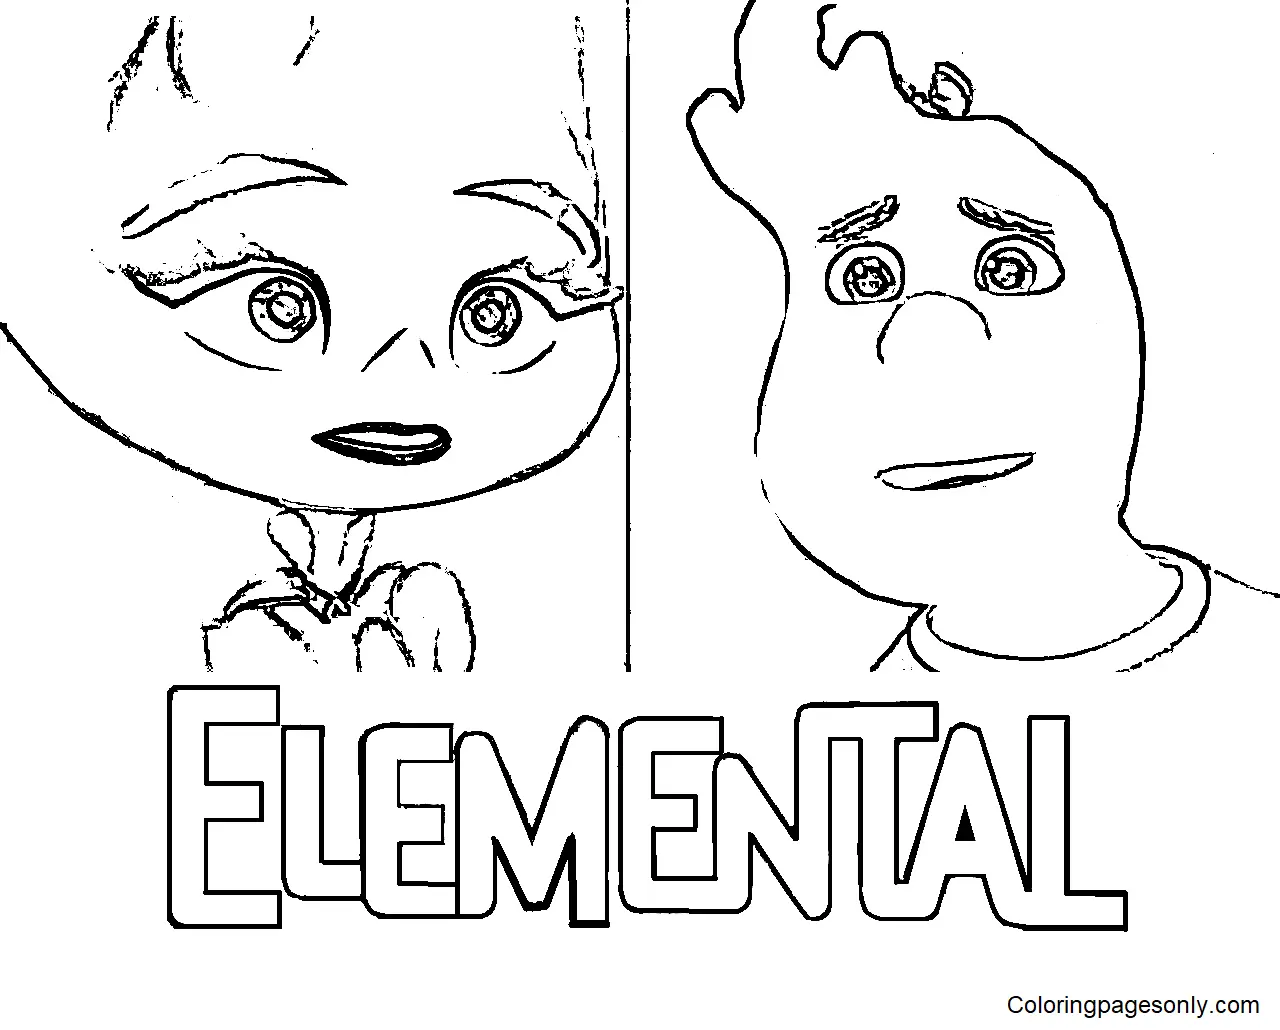 Elemental Coloring Pages